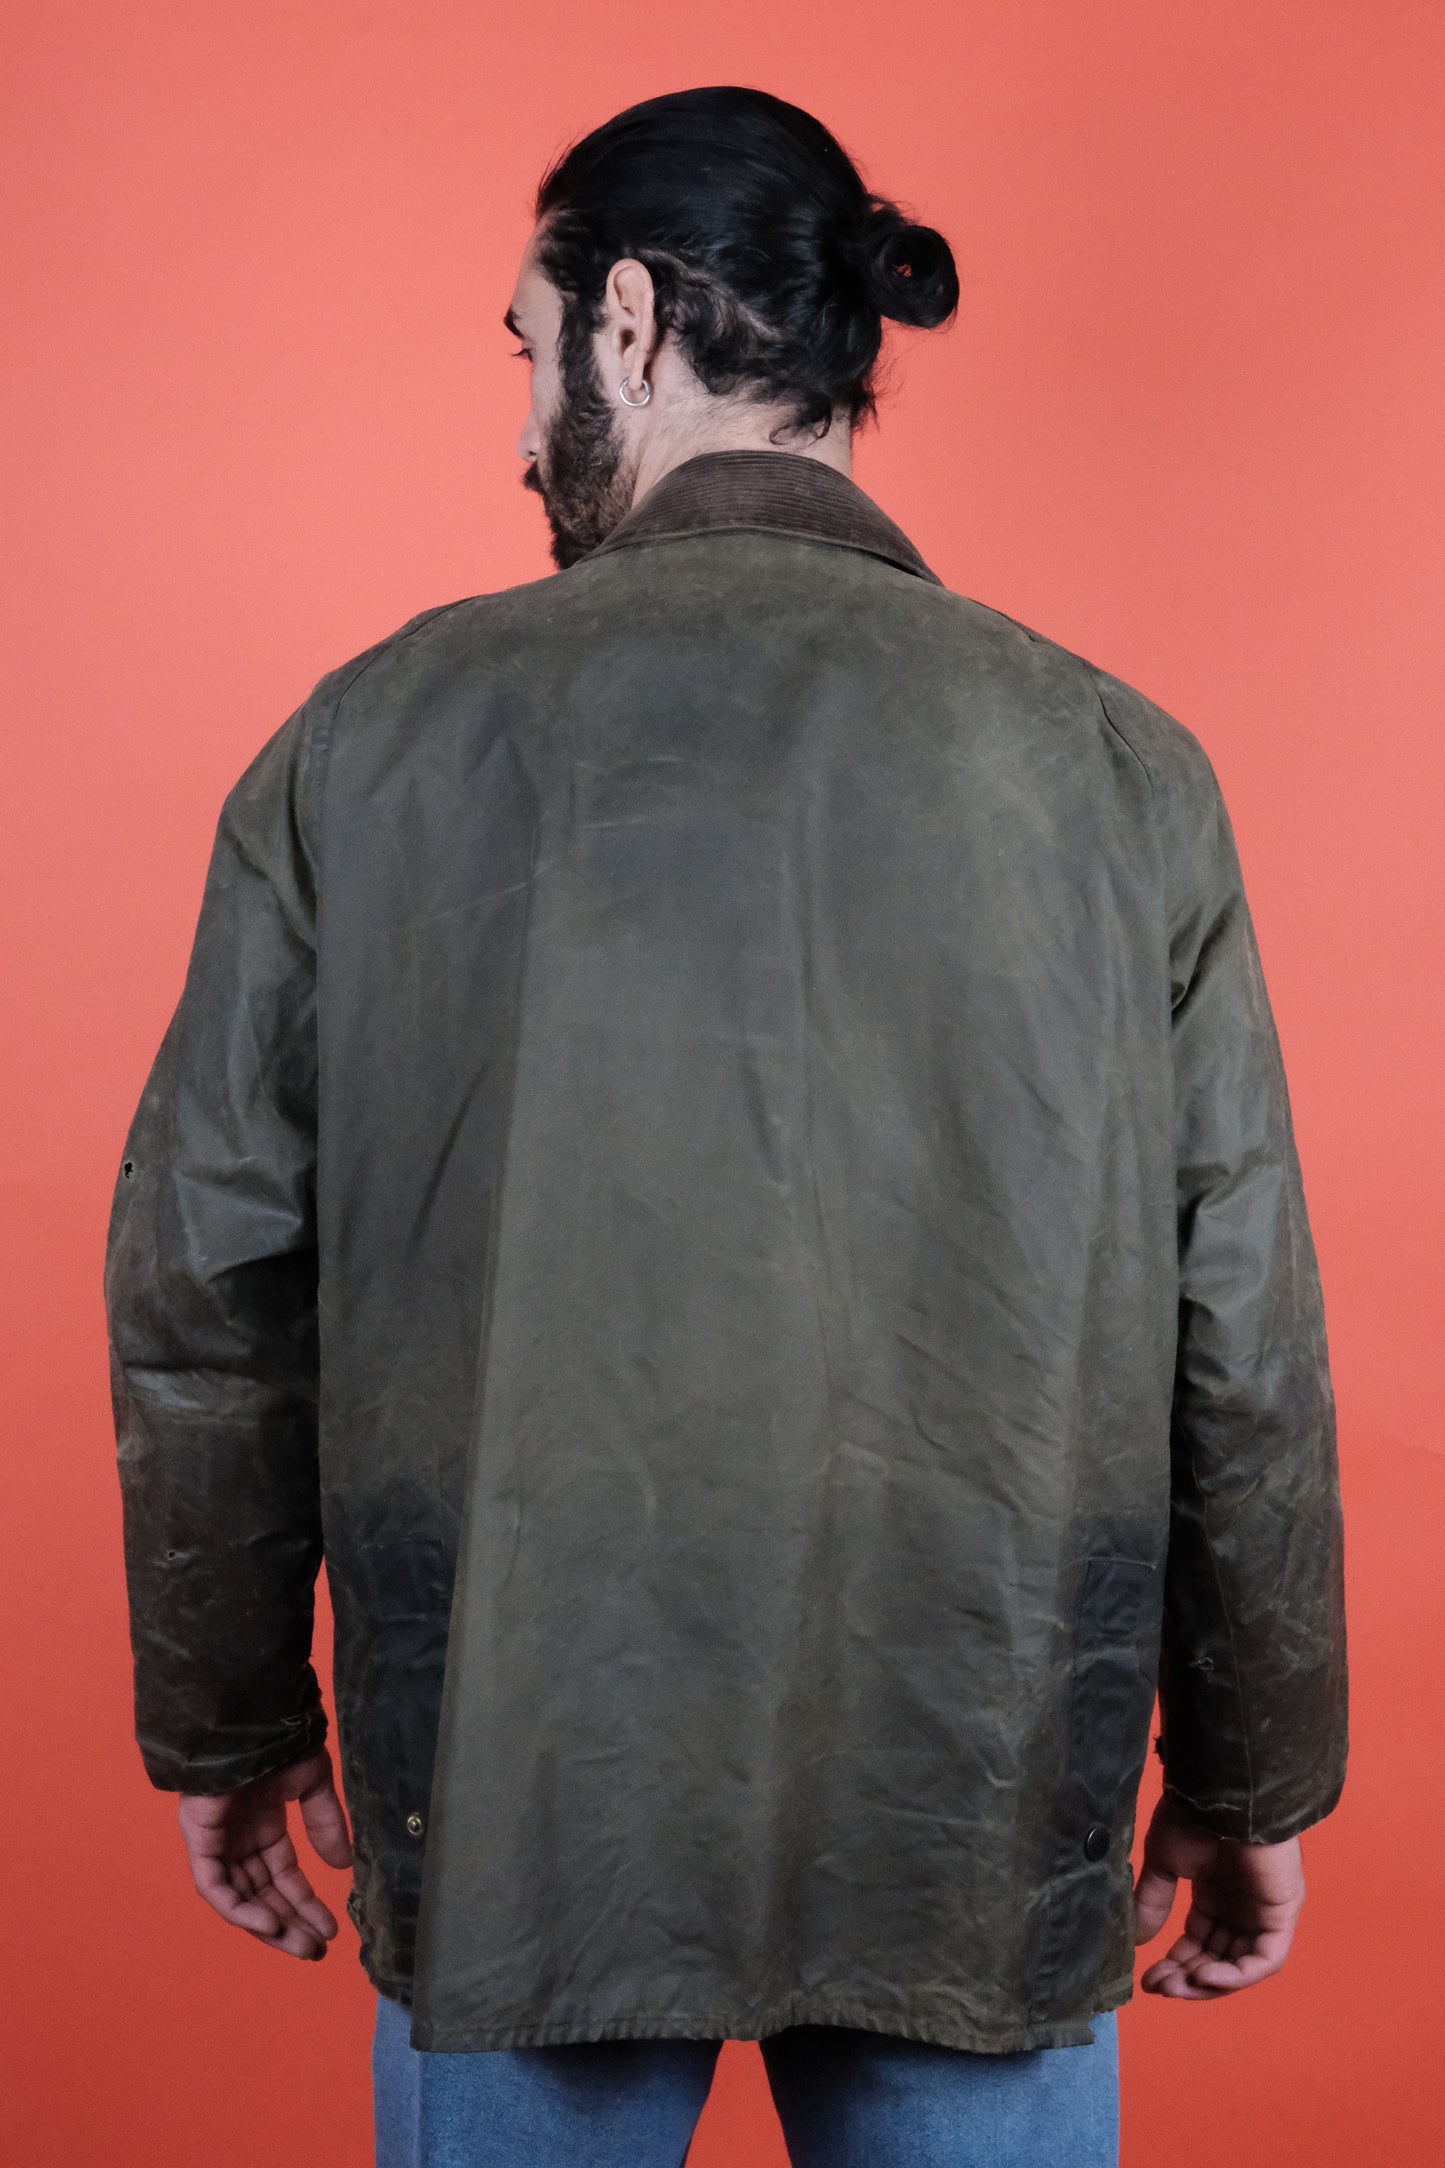 Barbour Bedale Wax Jacket Made in England 90's - vintage clothing clochard92.com